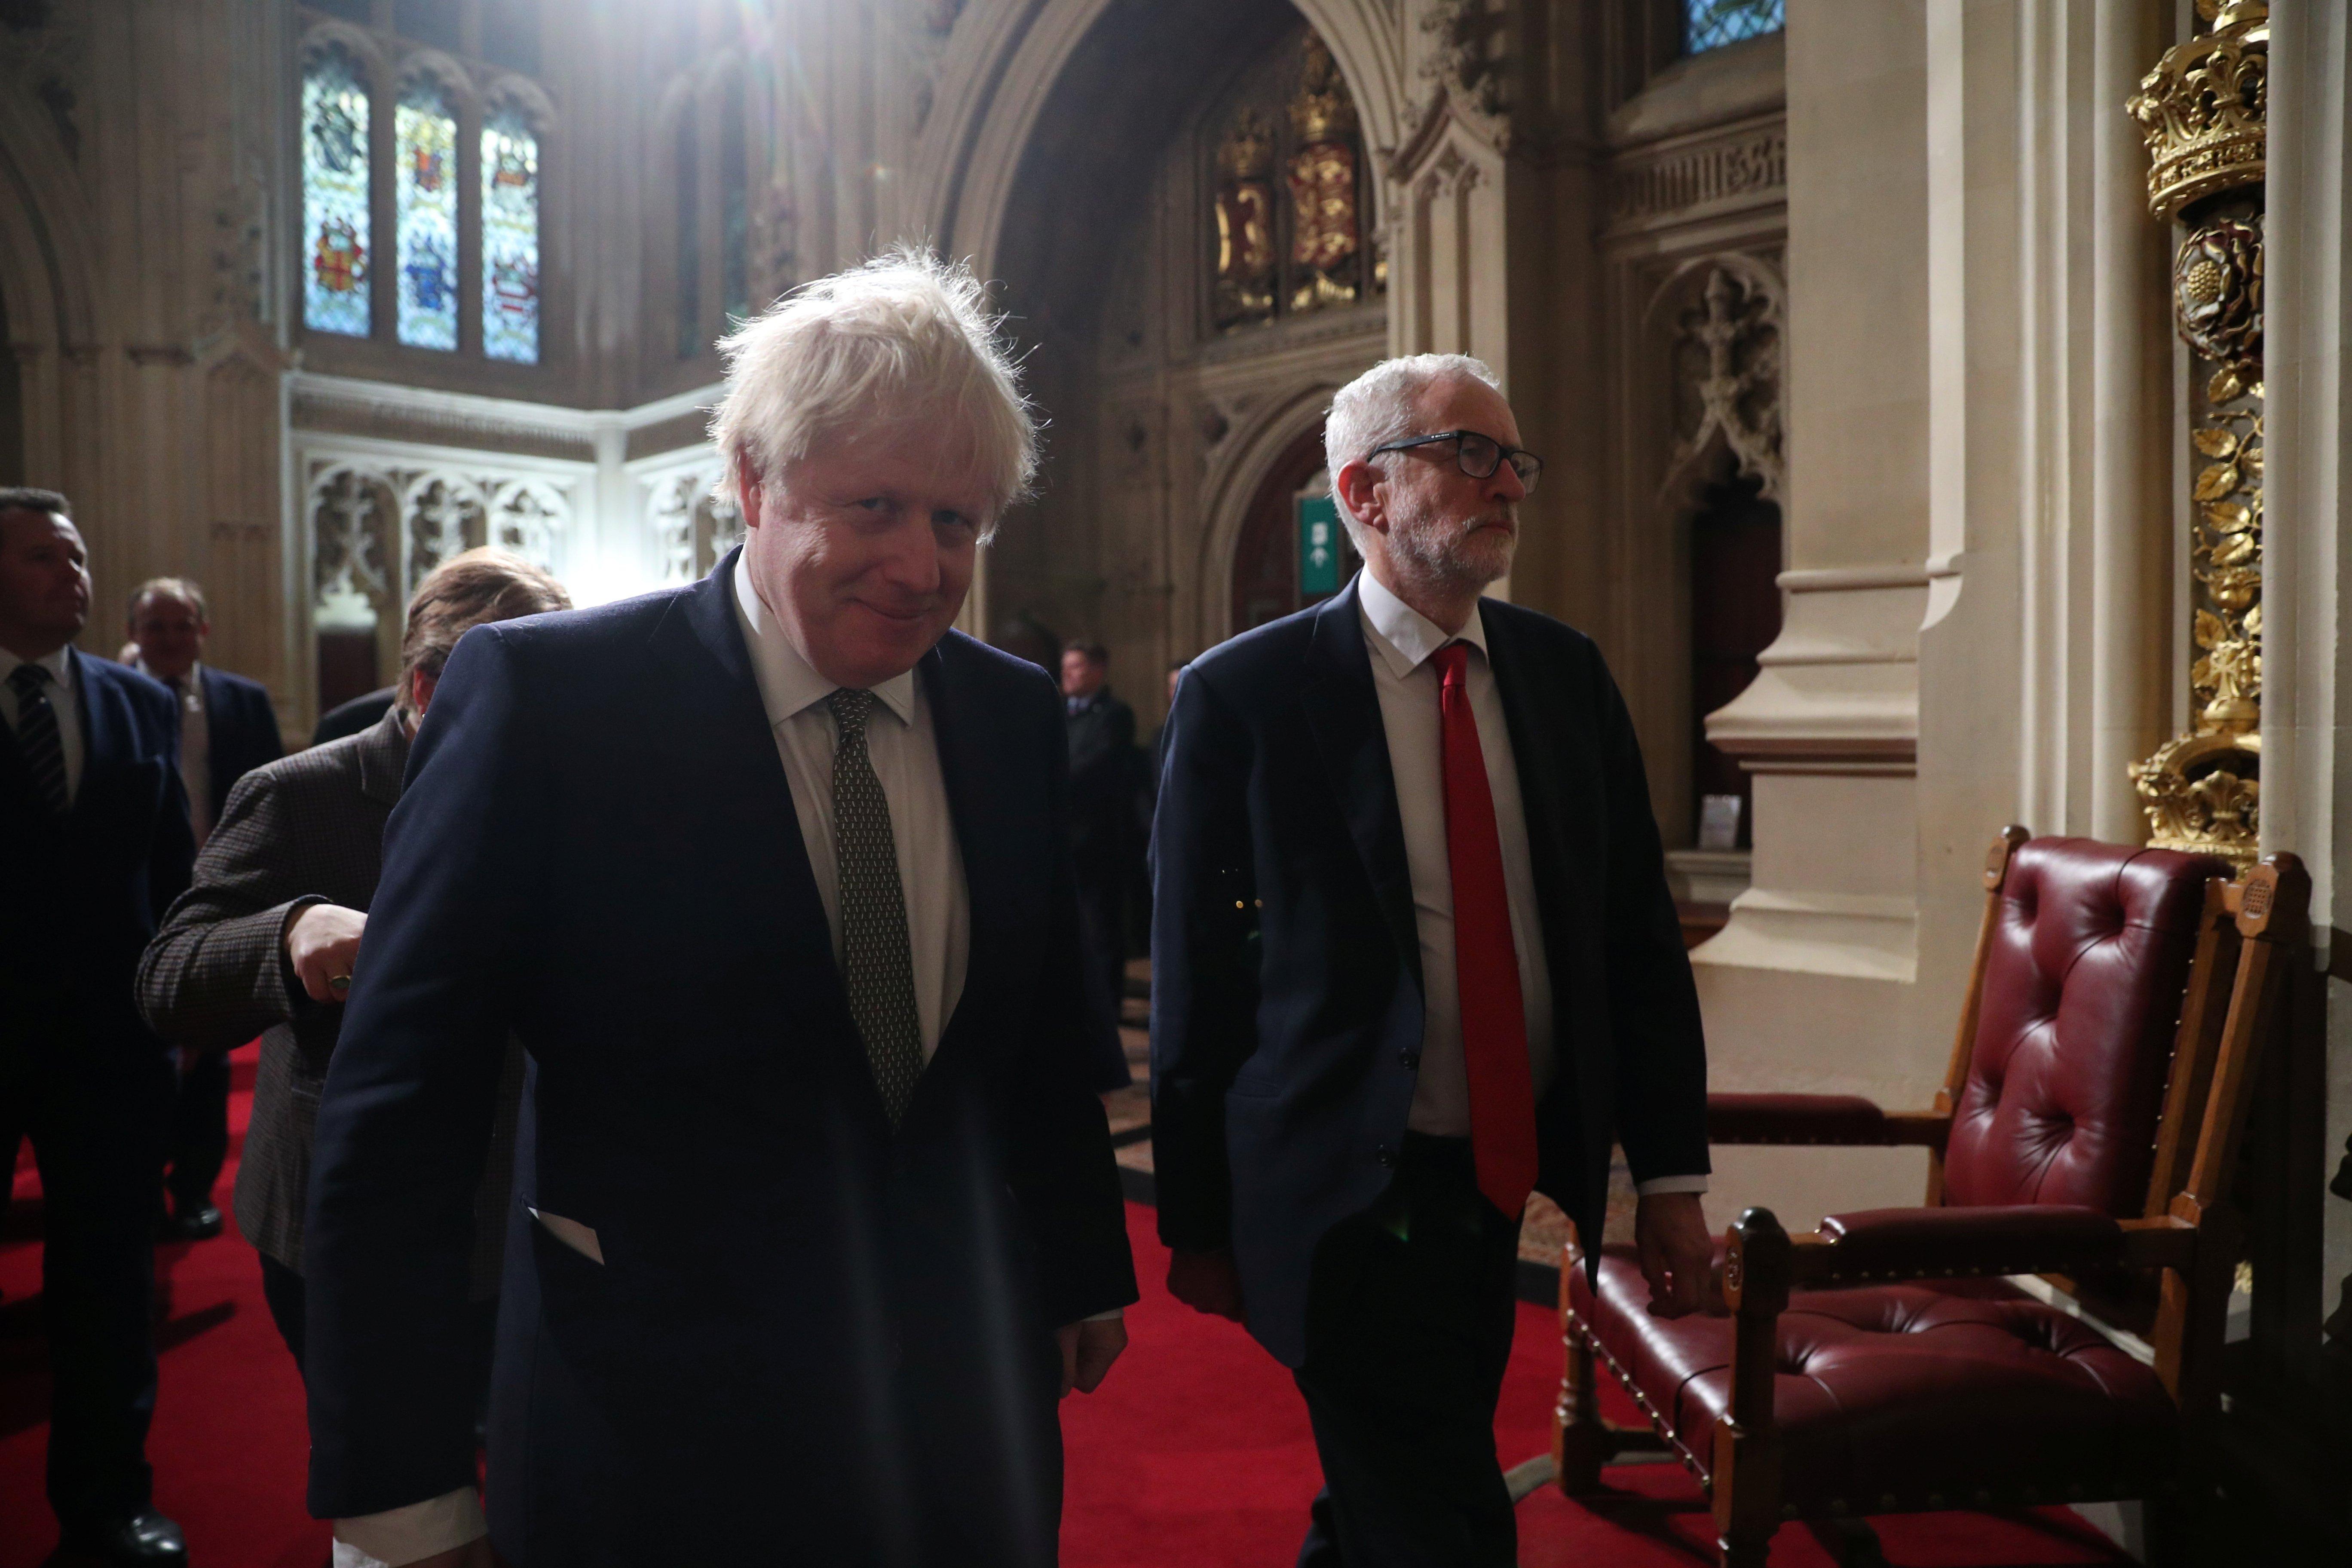 Prime Minister Boris Johnson and Labour Party leader Jeremy Corbyn walk through the Peers Lobby during the State Opening of Parliament by Queen Elizabeth II, in the House of Lords at the Palace of Westminster in London.